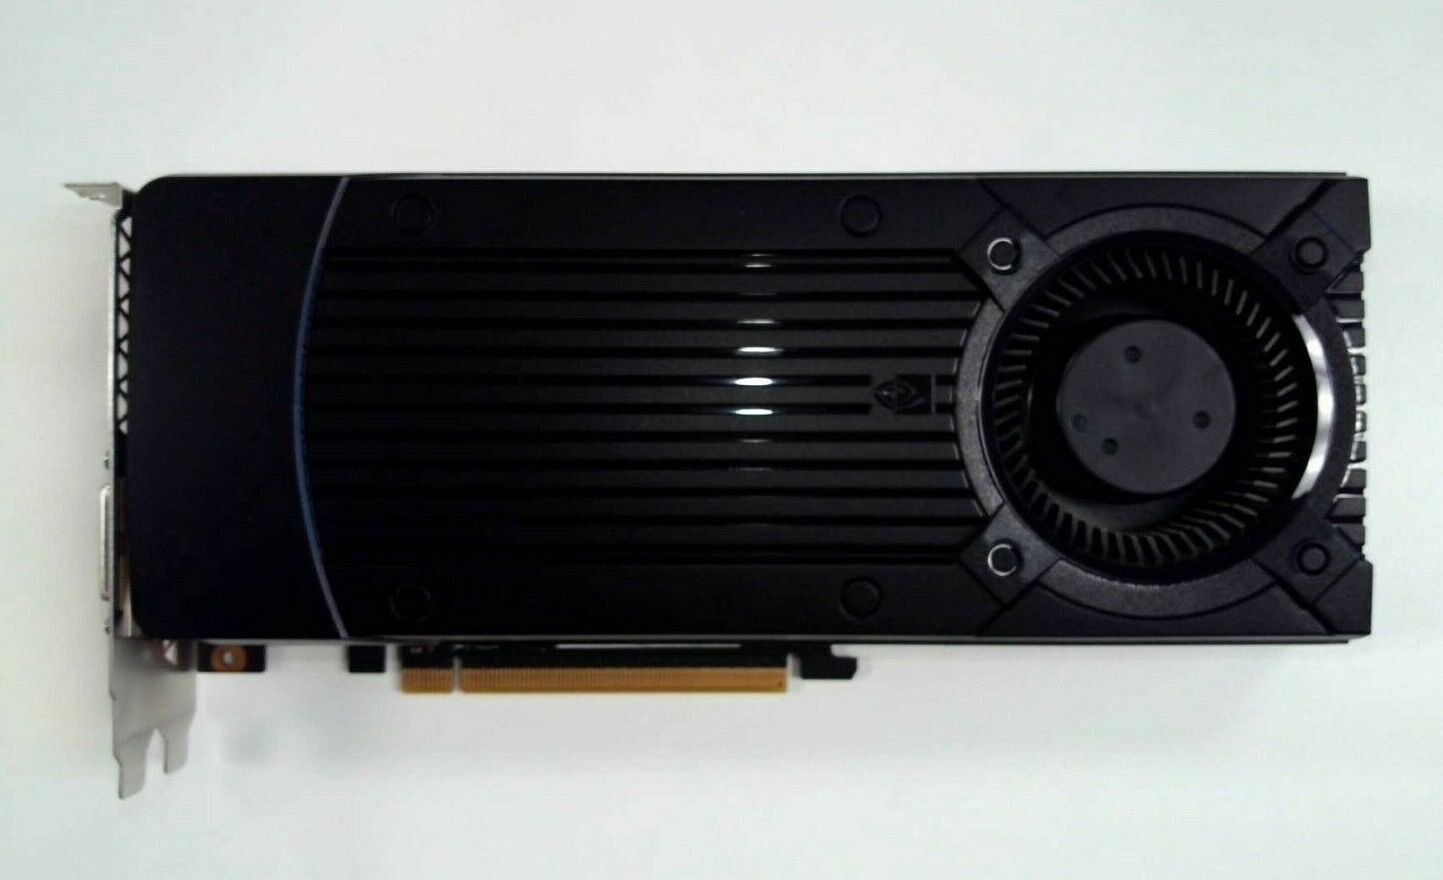 Asus NVIDIA Ge-Force GTX 1060 6GB Blower Graphics Card VR Ready